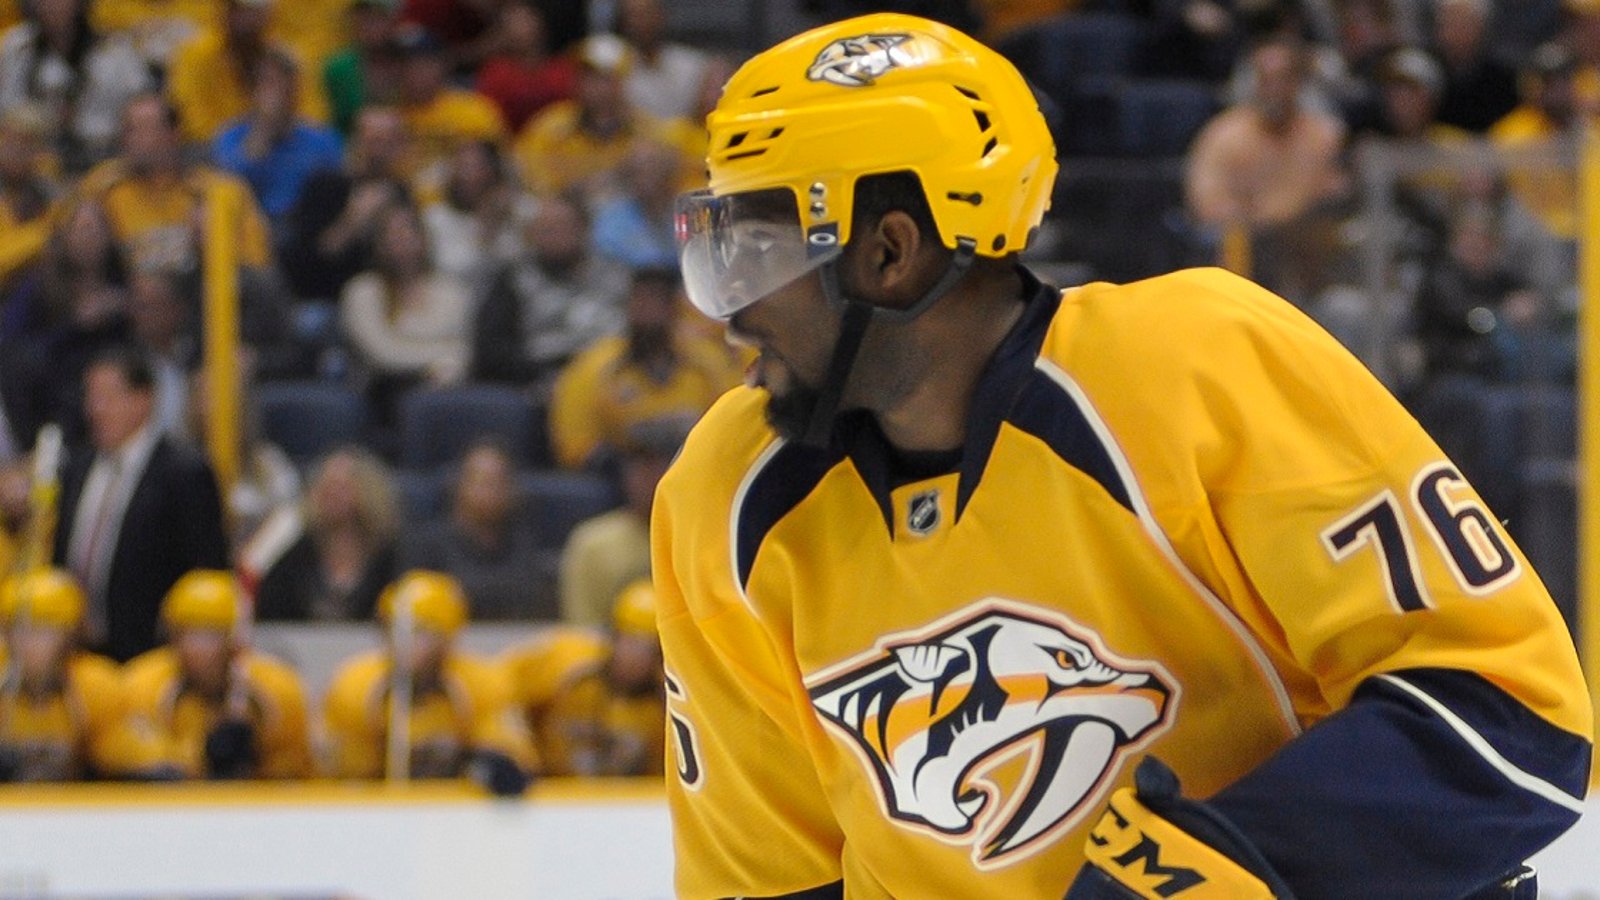 P.K. Subban just doubled down on his guarantee!